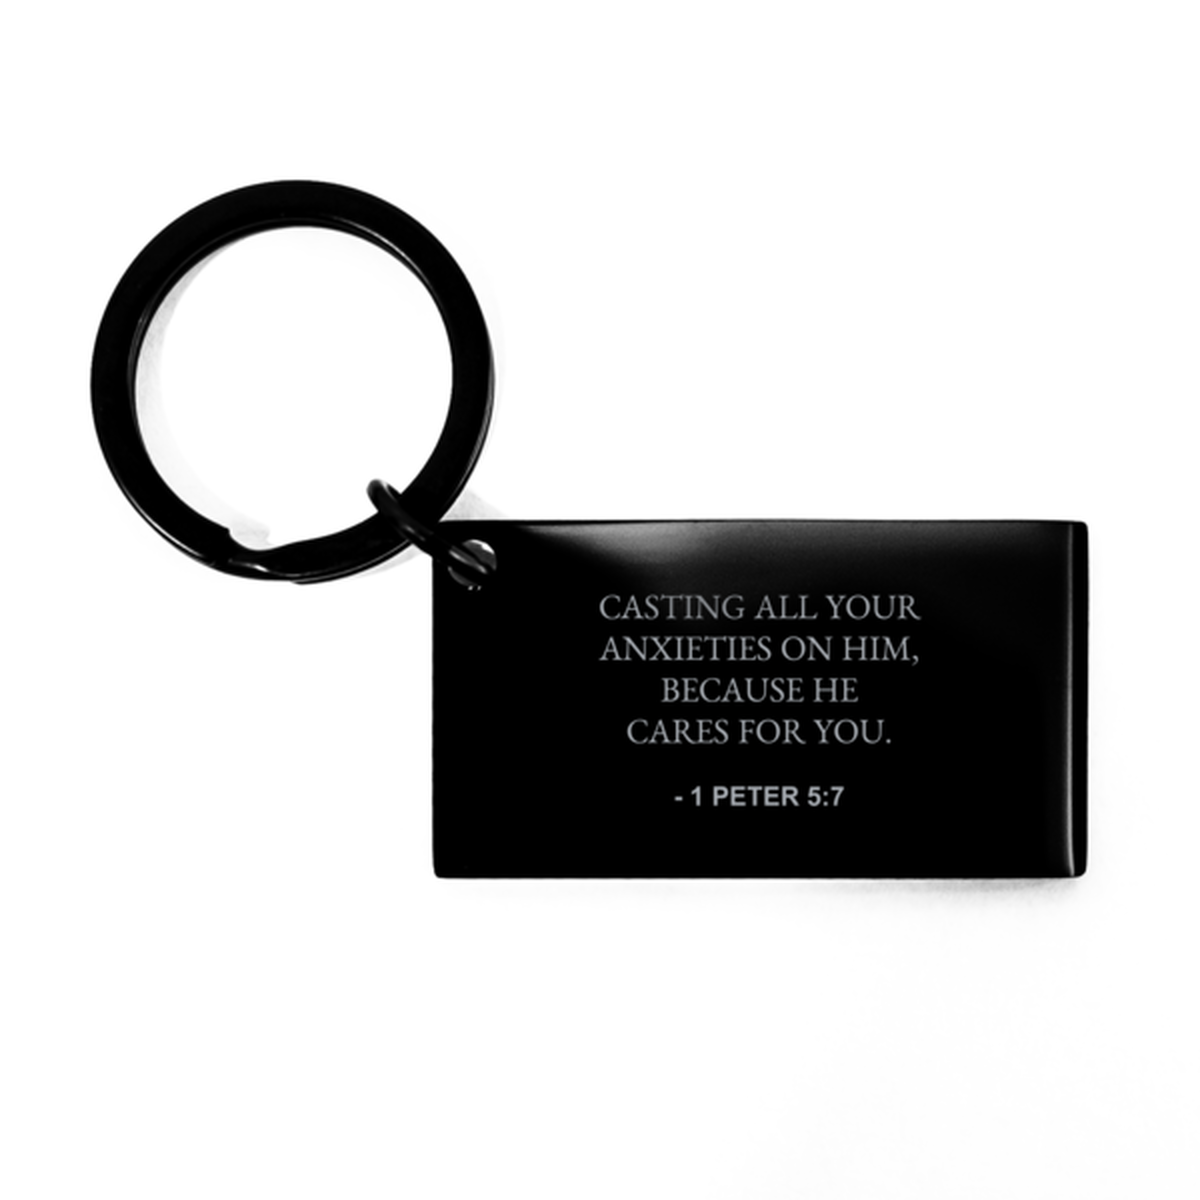 Bible Verse Black Keychain, 1 Peter 5:7 Casting All Your Anxieties On Him, Because He, Christian Inspirational Key Ring Gifts For Men Women